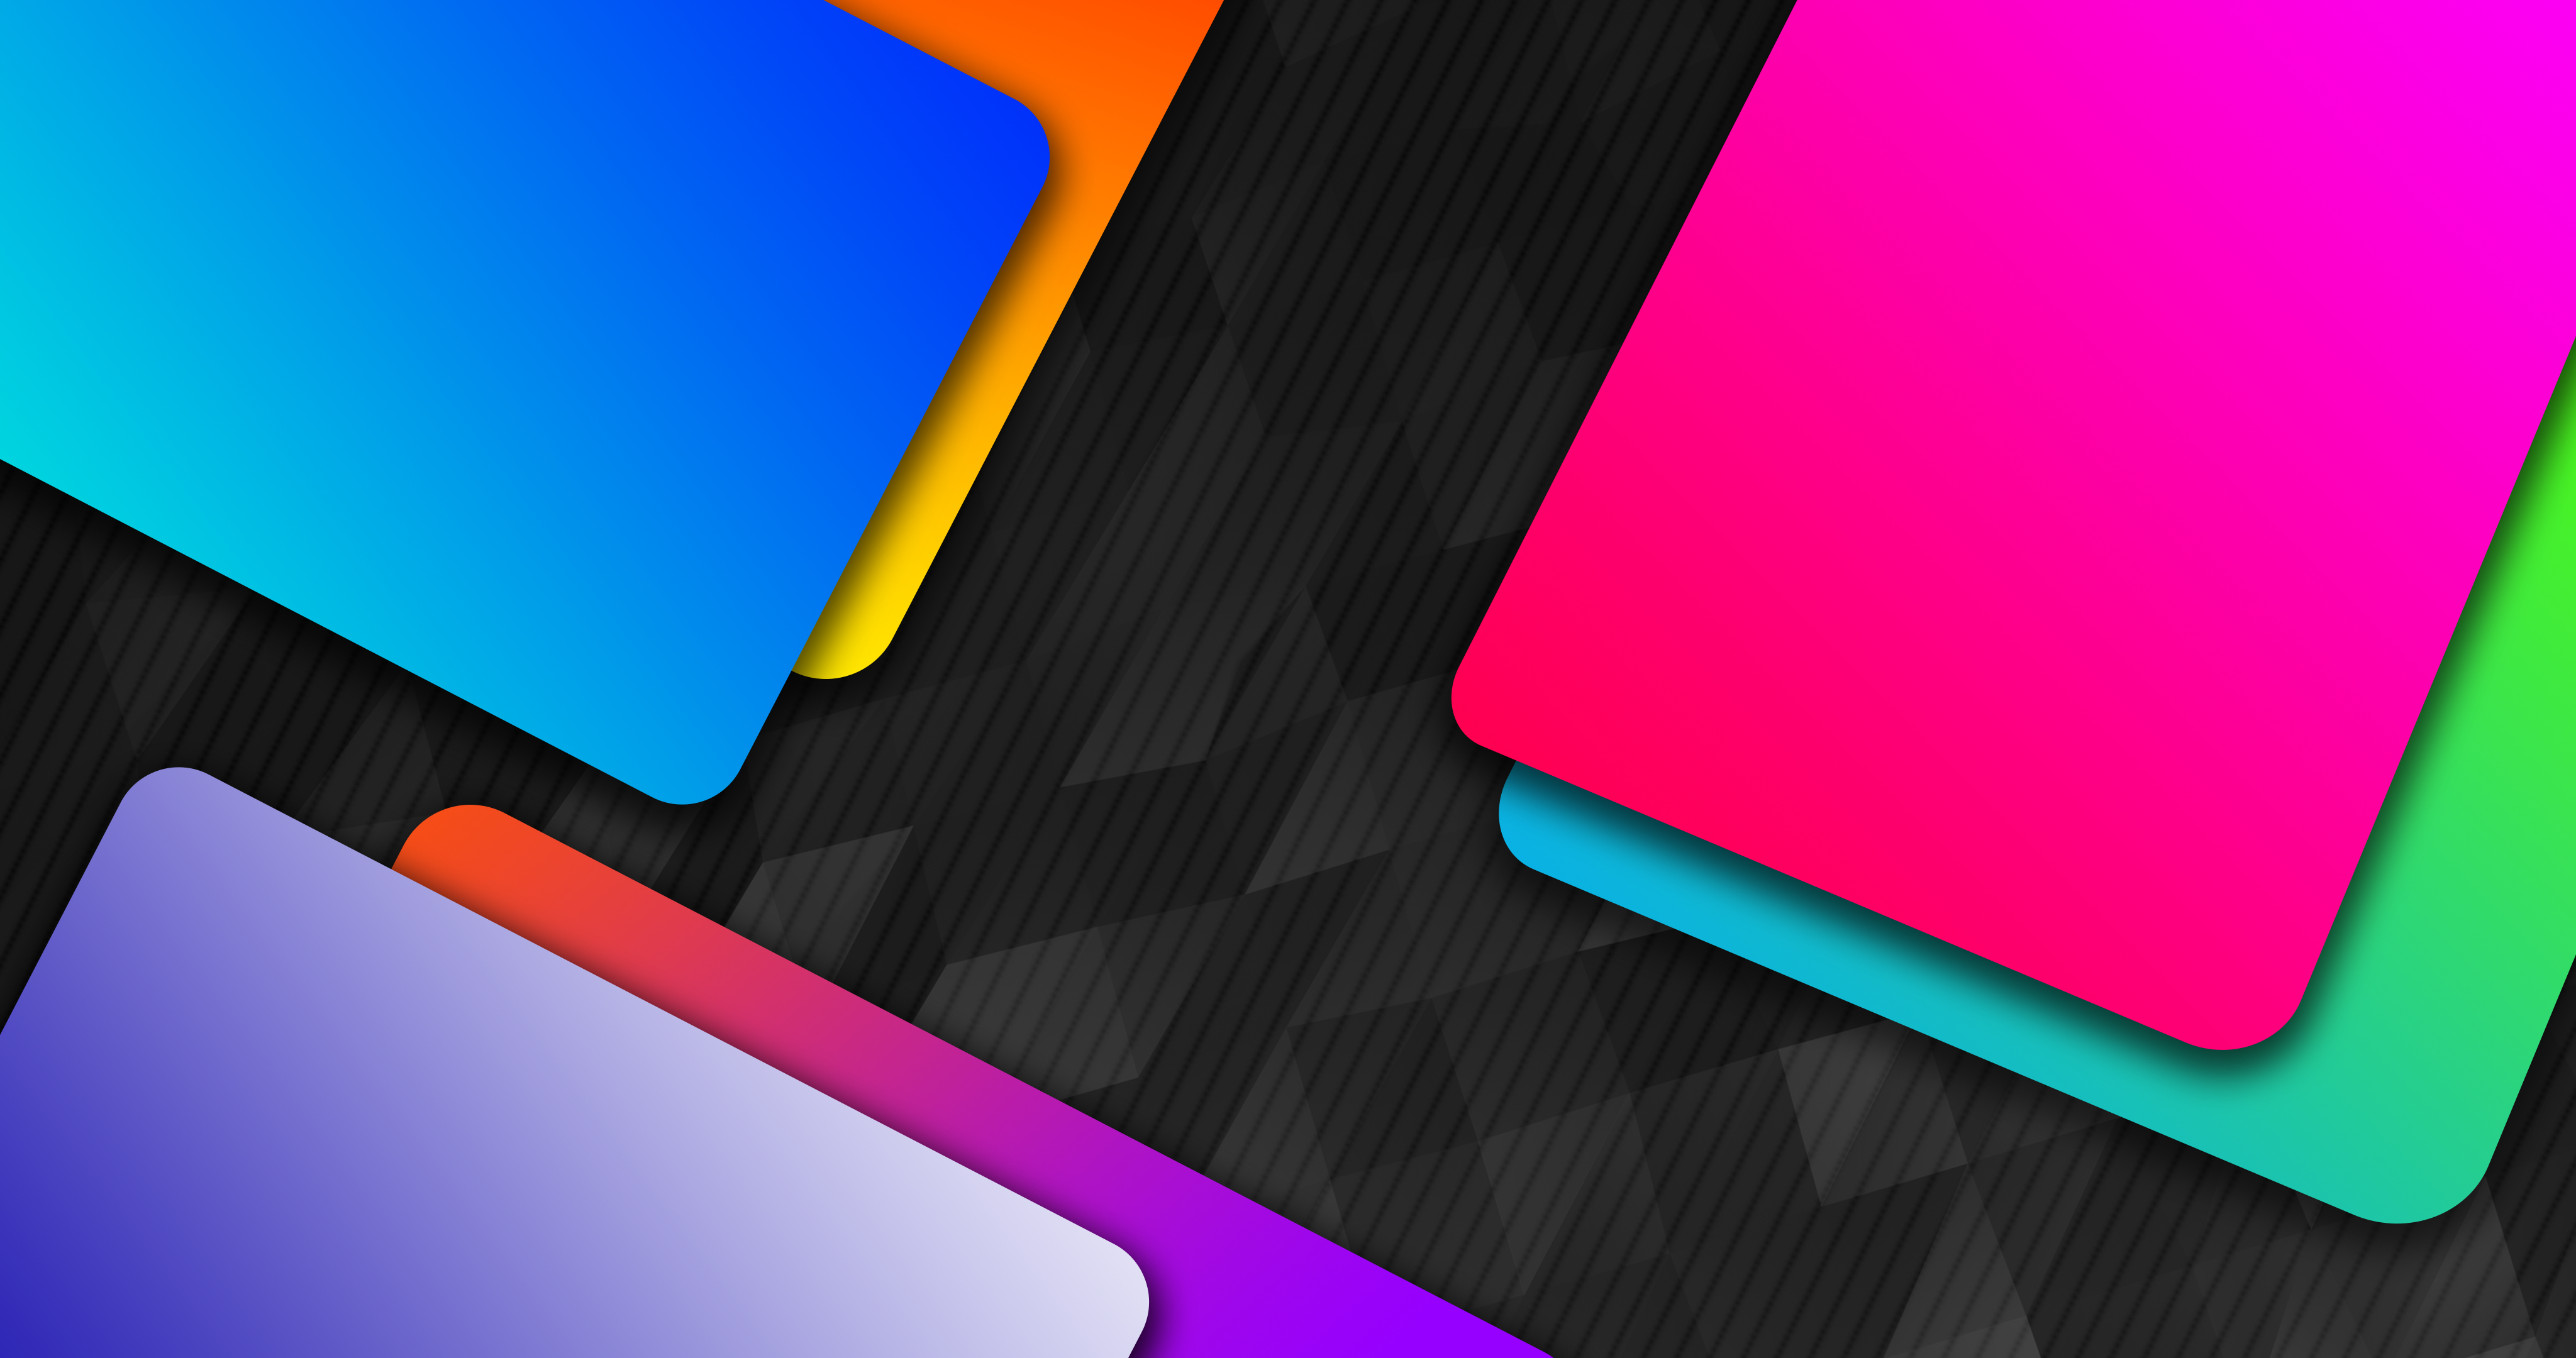 Colorful Gradient  New Shapes  Wallpaper HD Artist 4K 